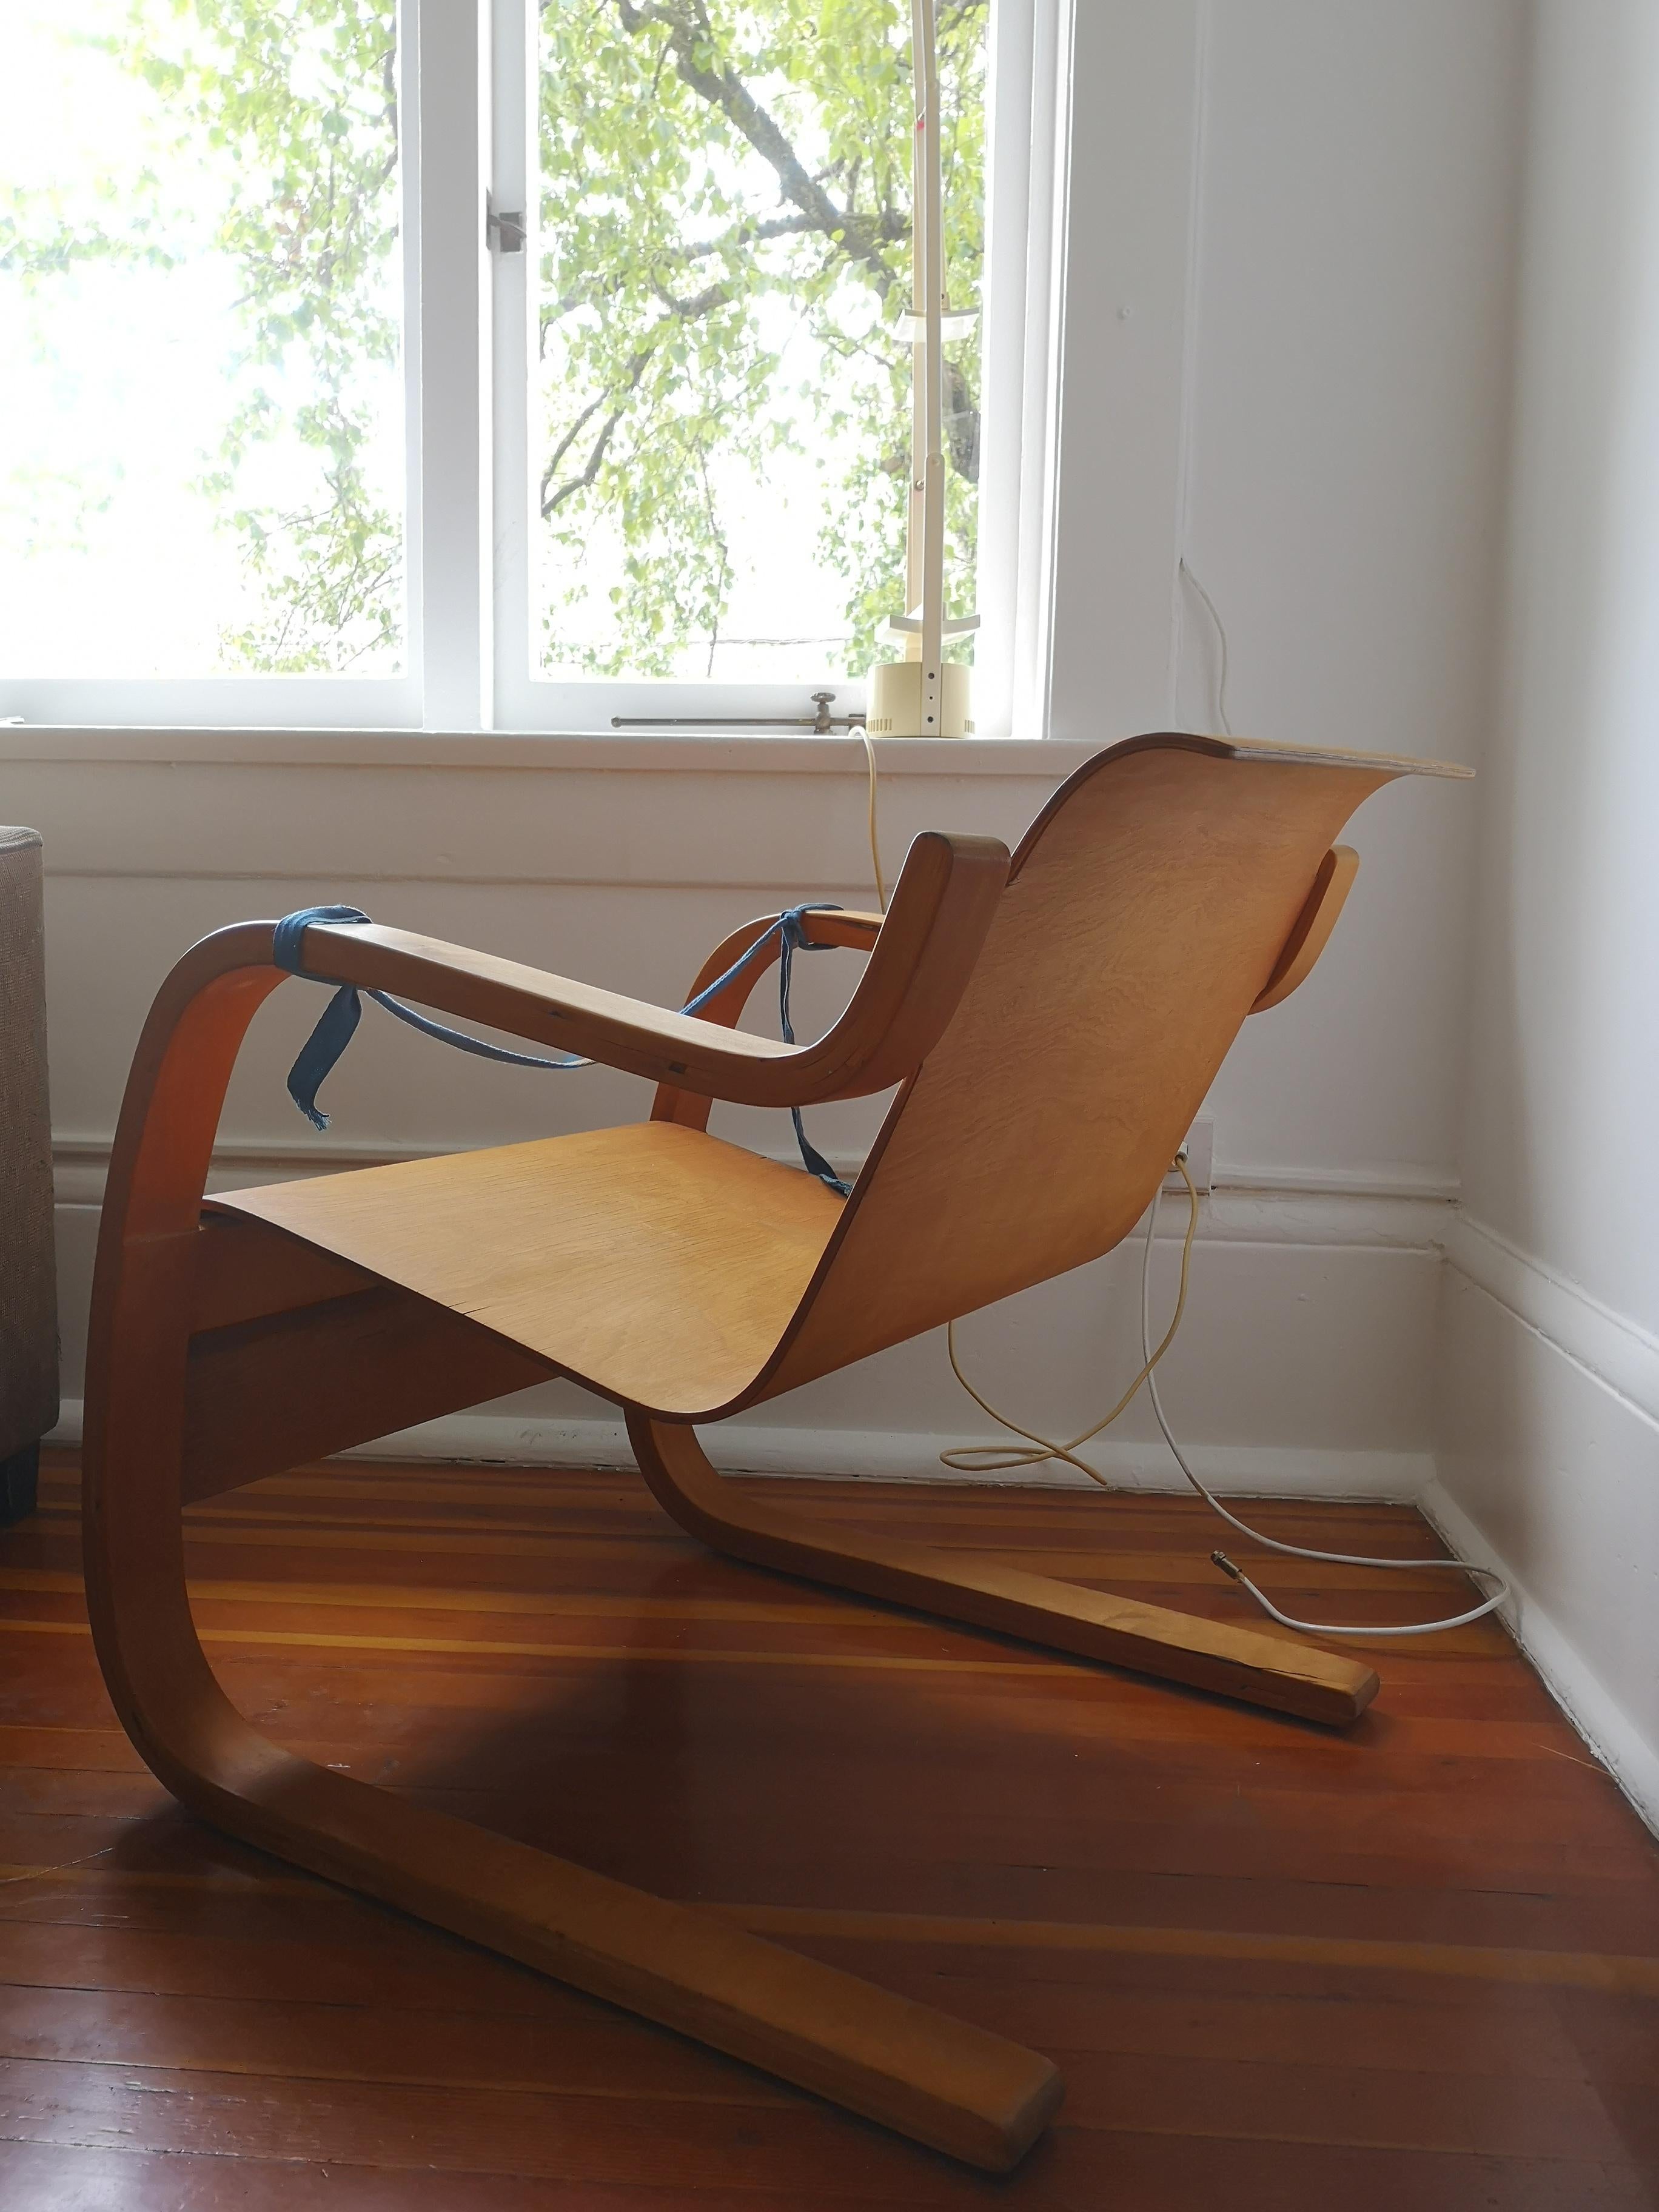 Exceptional early example of Alvar Aalto's model 31 chair. This piece is comprised of bentwood and birch plywood, and is in incredible original condition. Restoration options available upon request.

